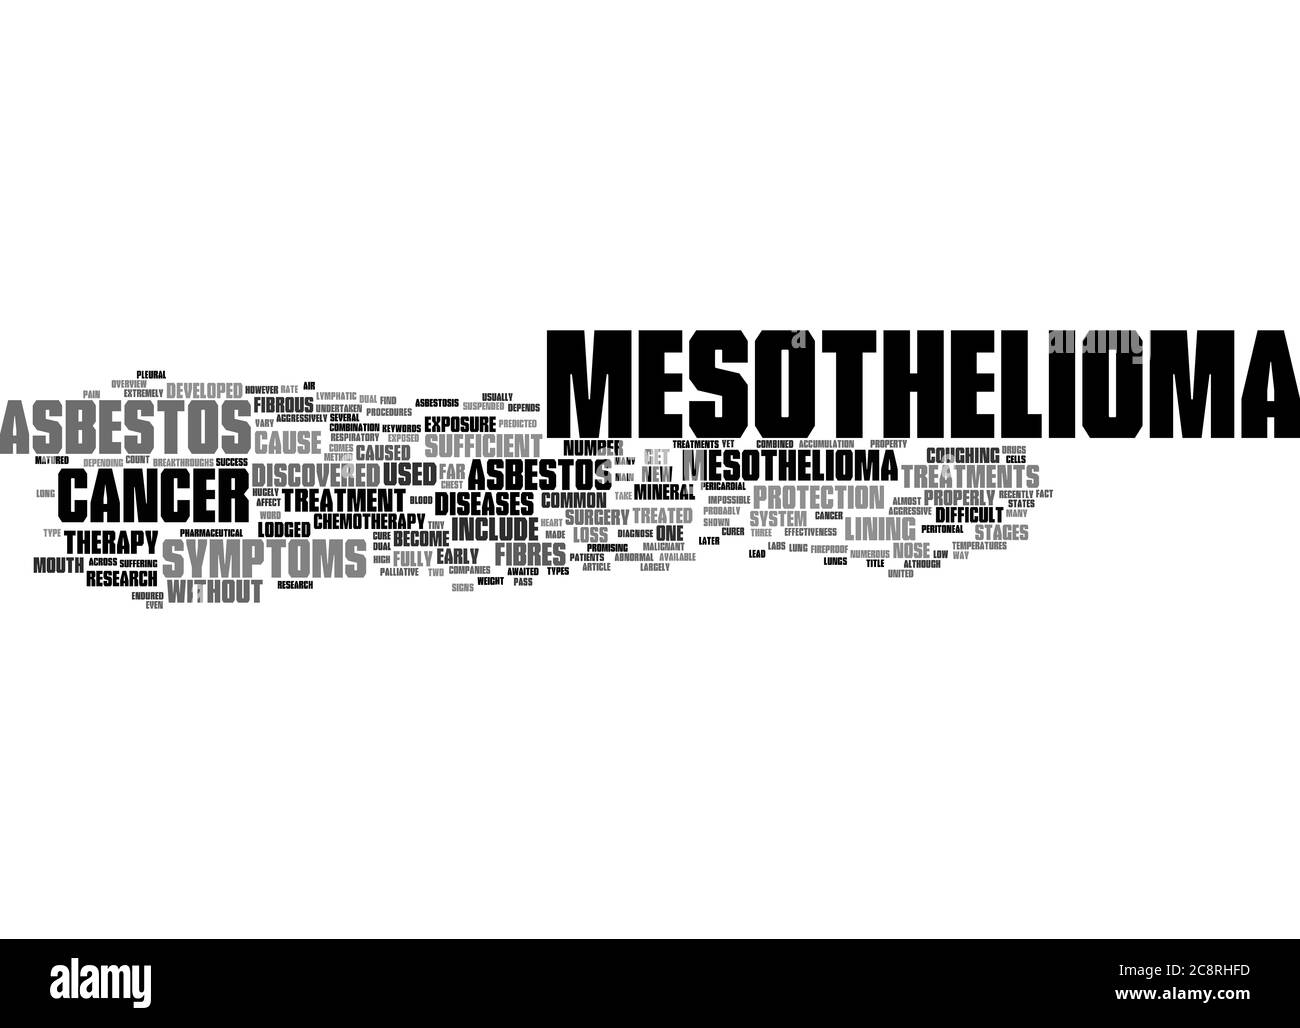 mesothelioma right lung